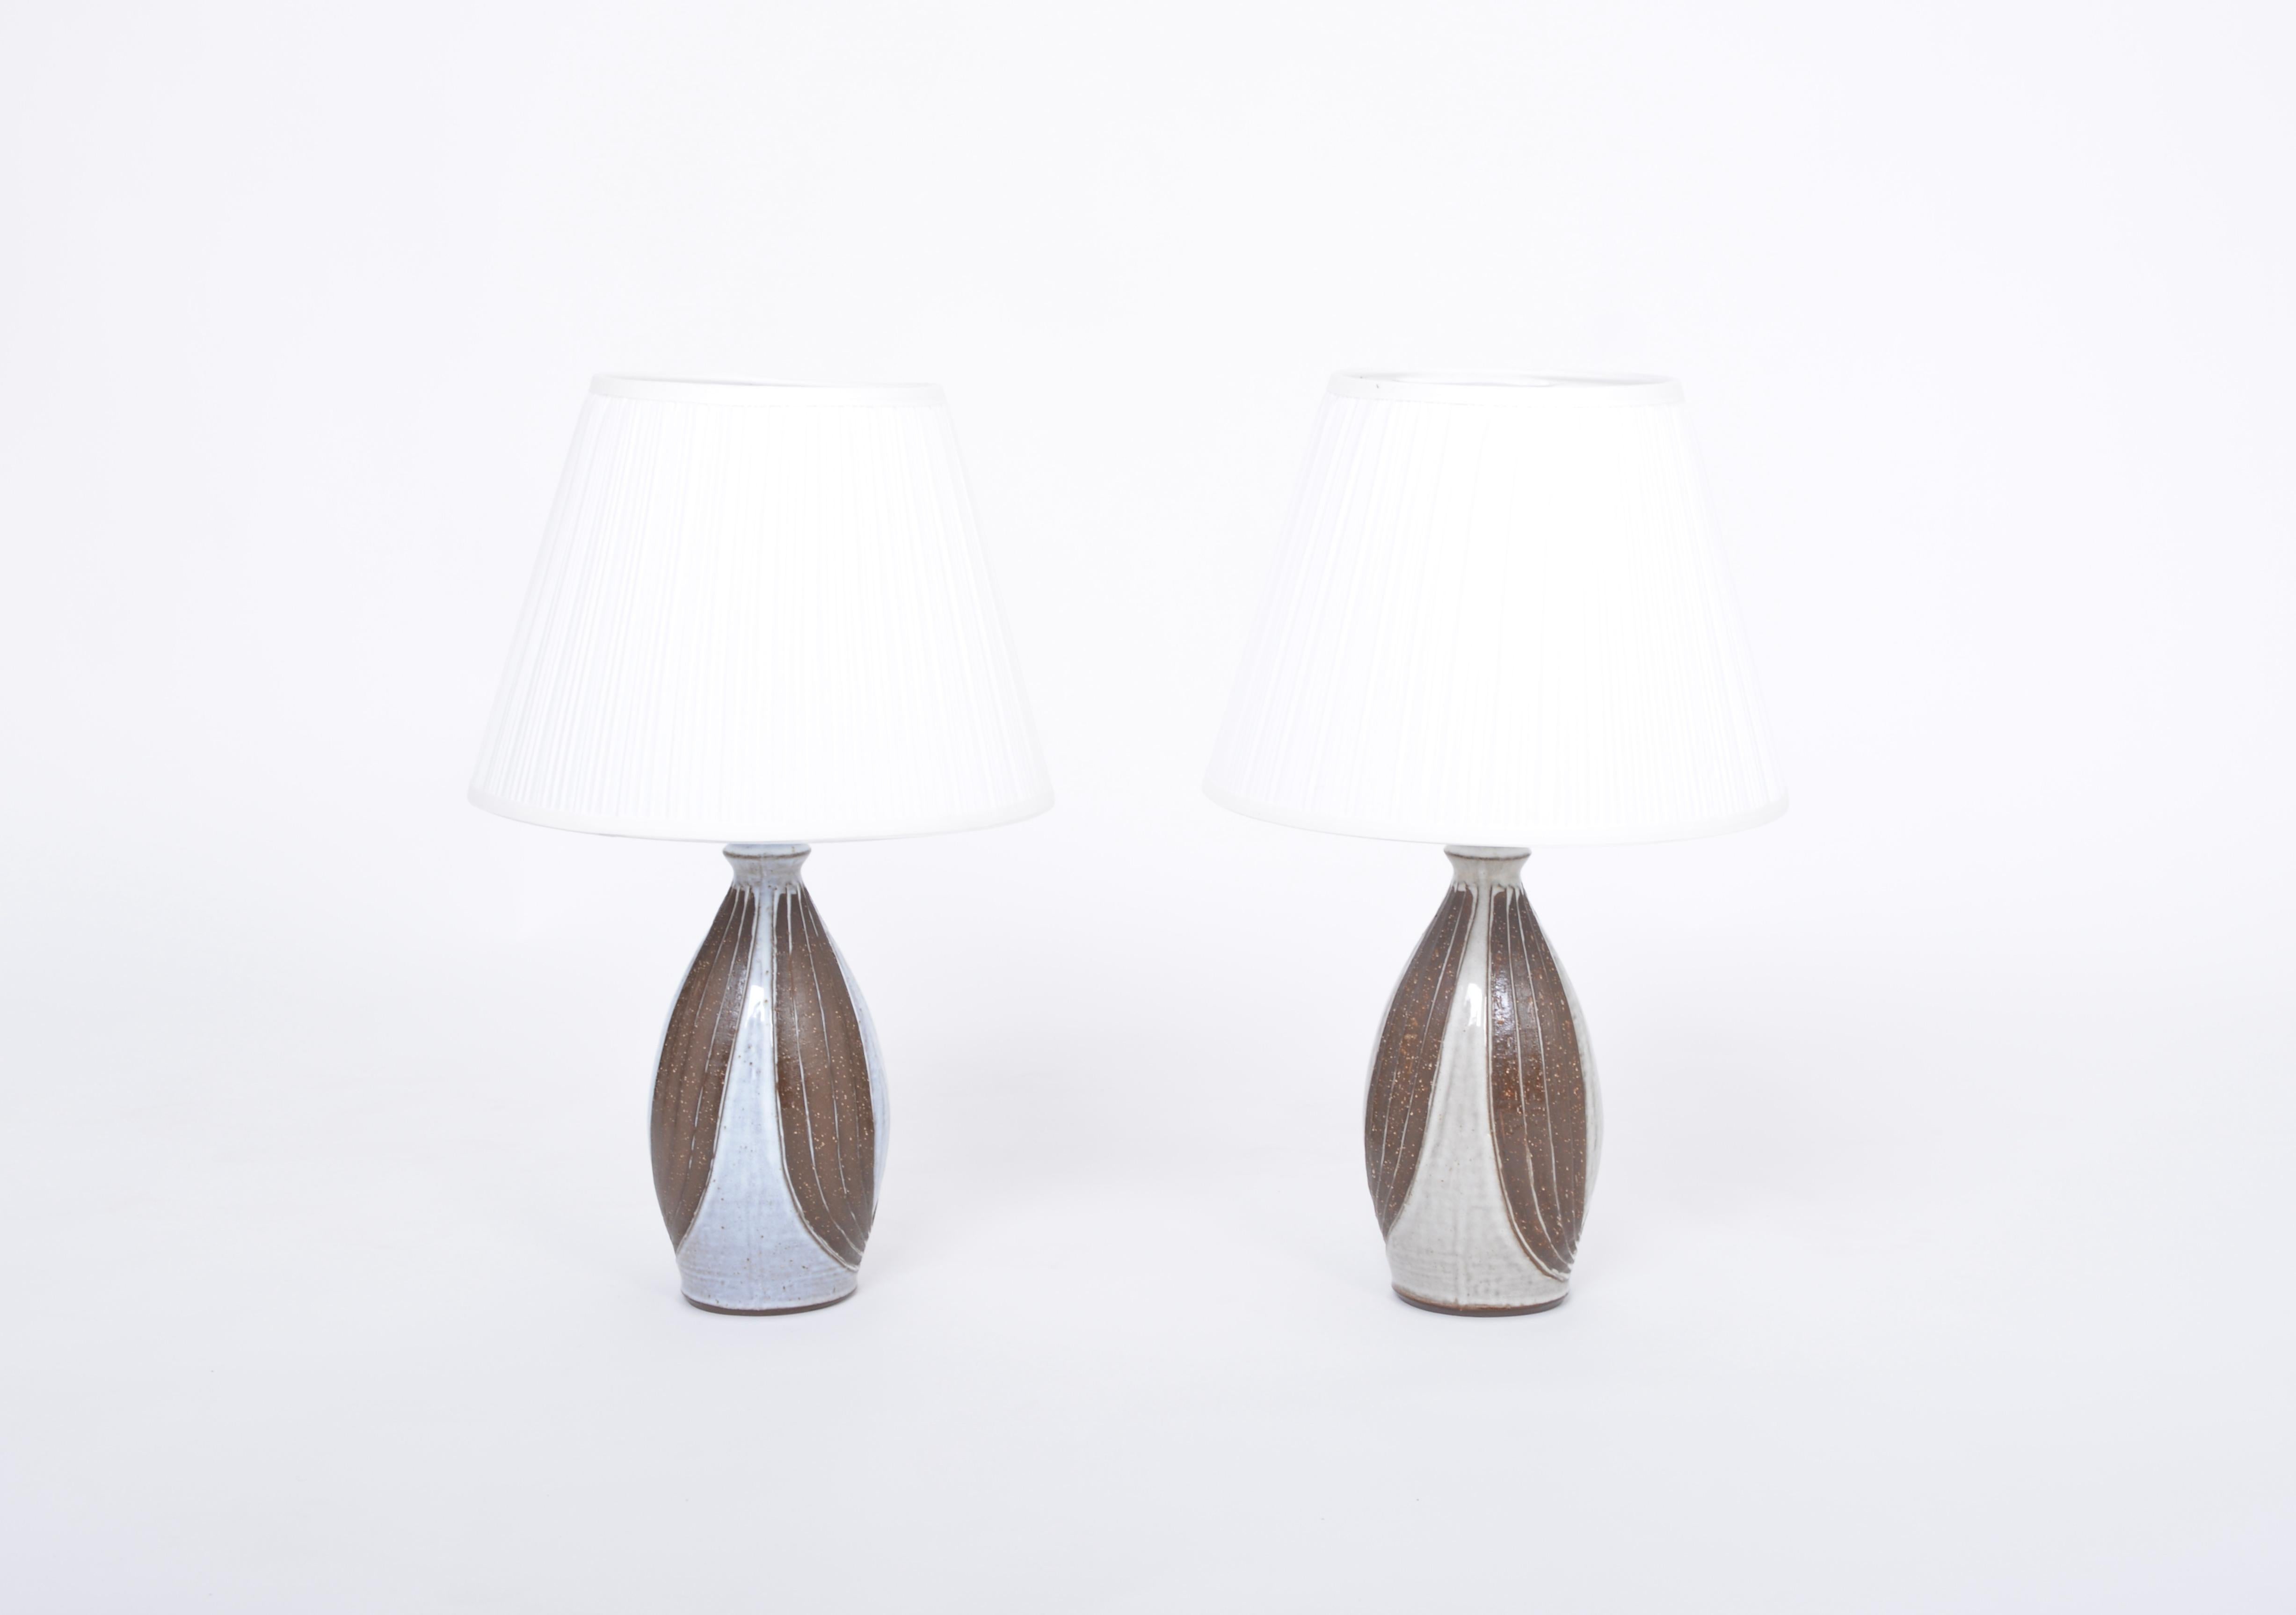 Pair of Danish midcentury table lamps by Michael Andersen 
This pair of table lamps was produced by Michael Andersen & Søn in the 1960s.
Beautiful sculpturally shaped base with brown and white / grey colored glaze. The base have an onion like